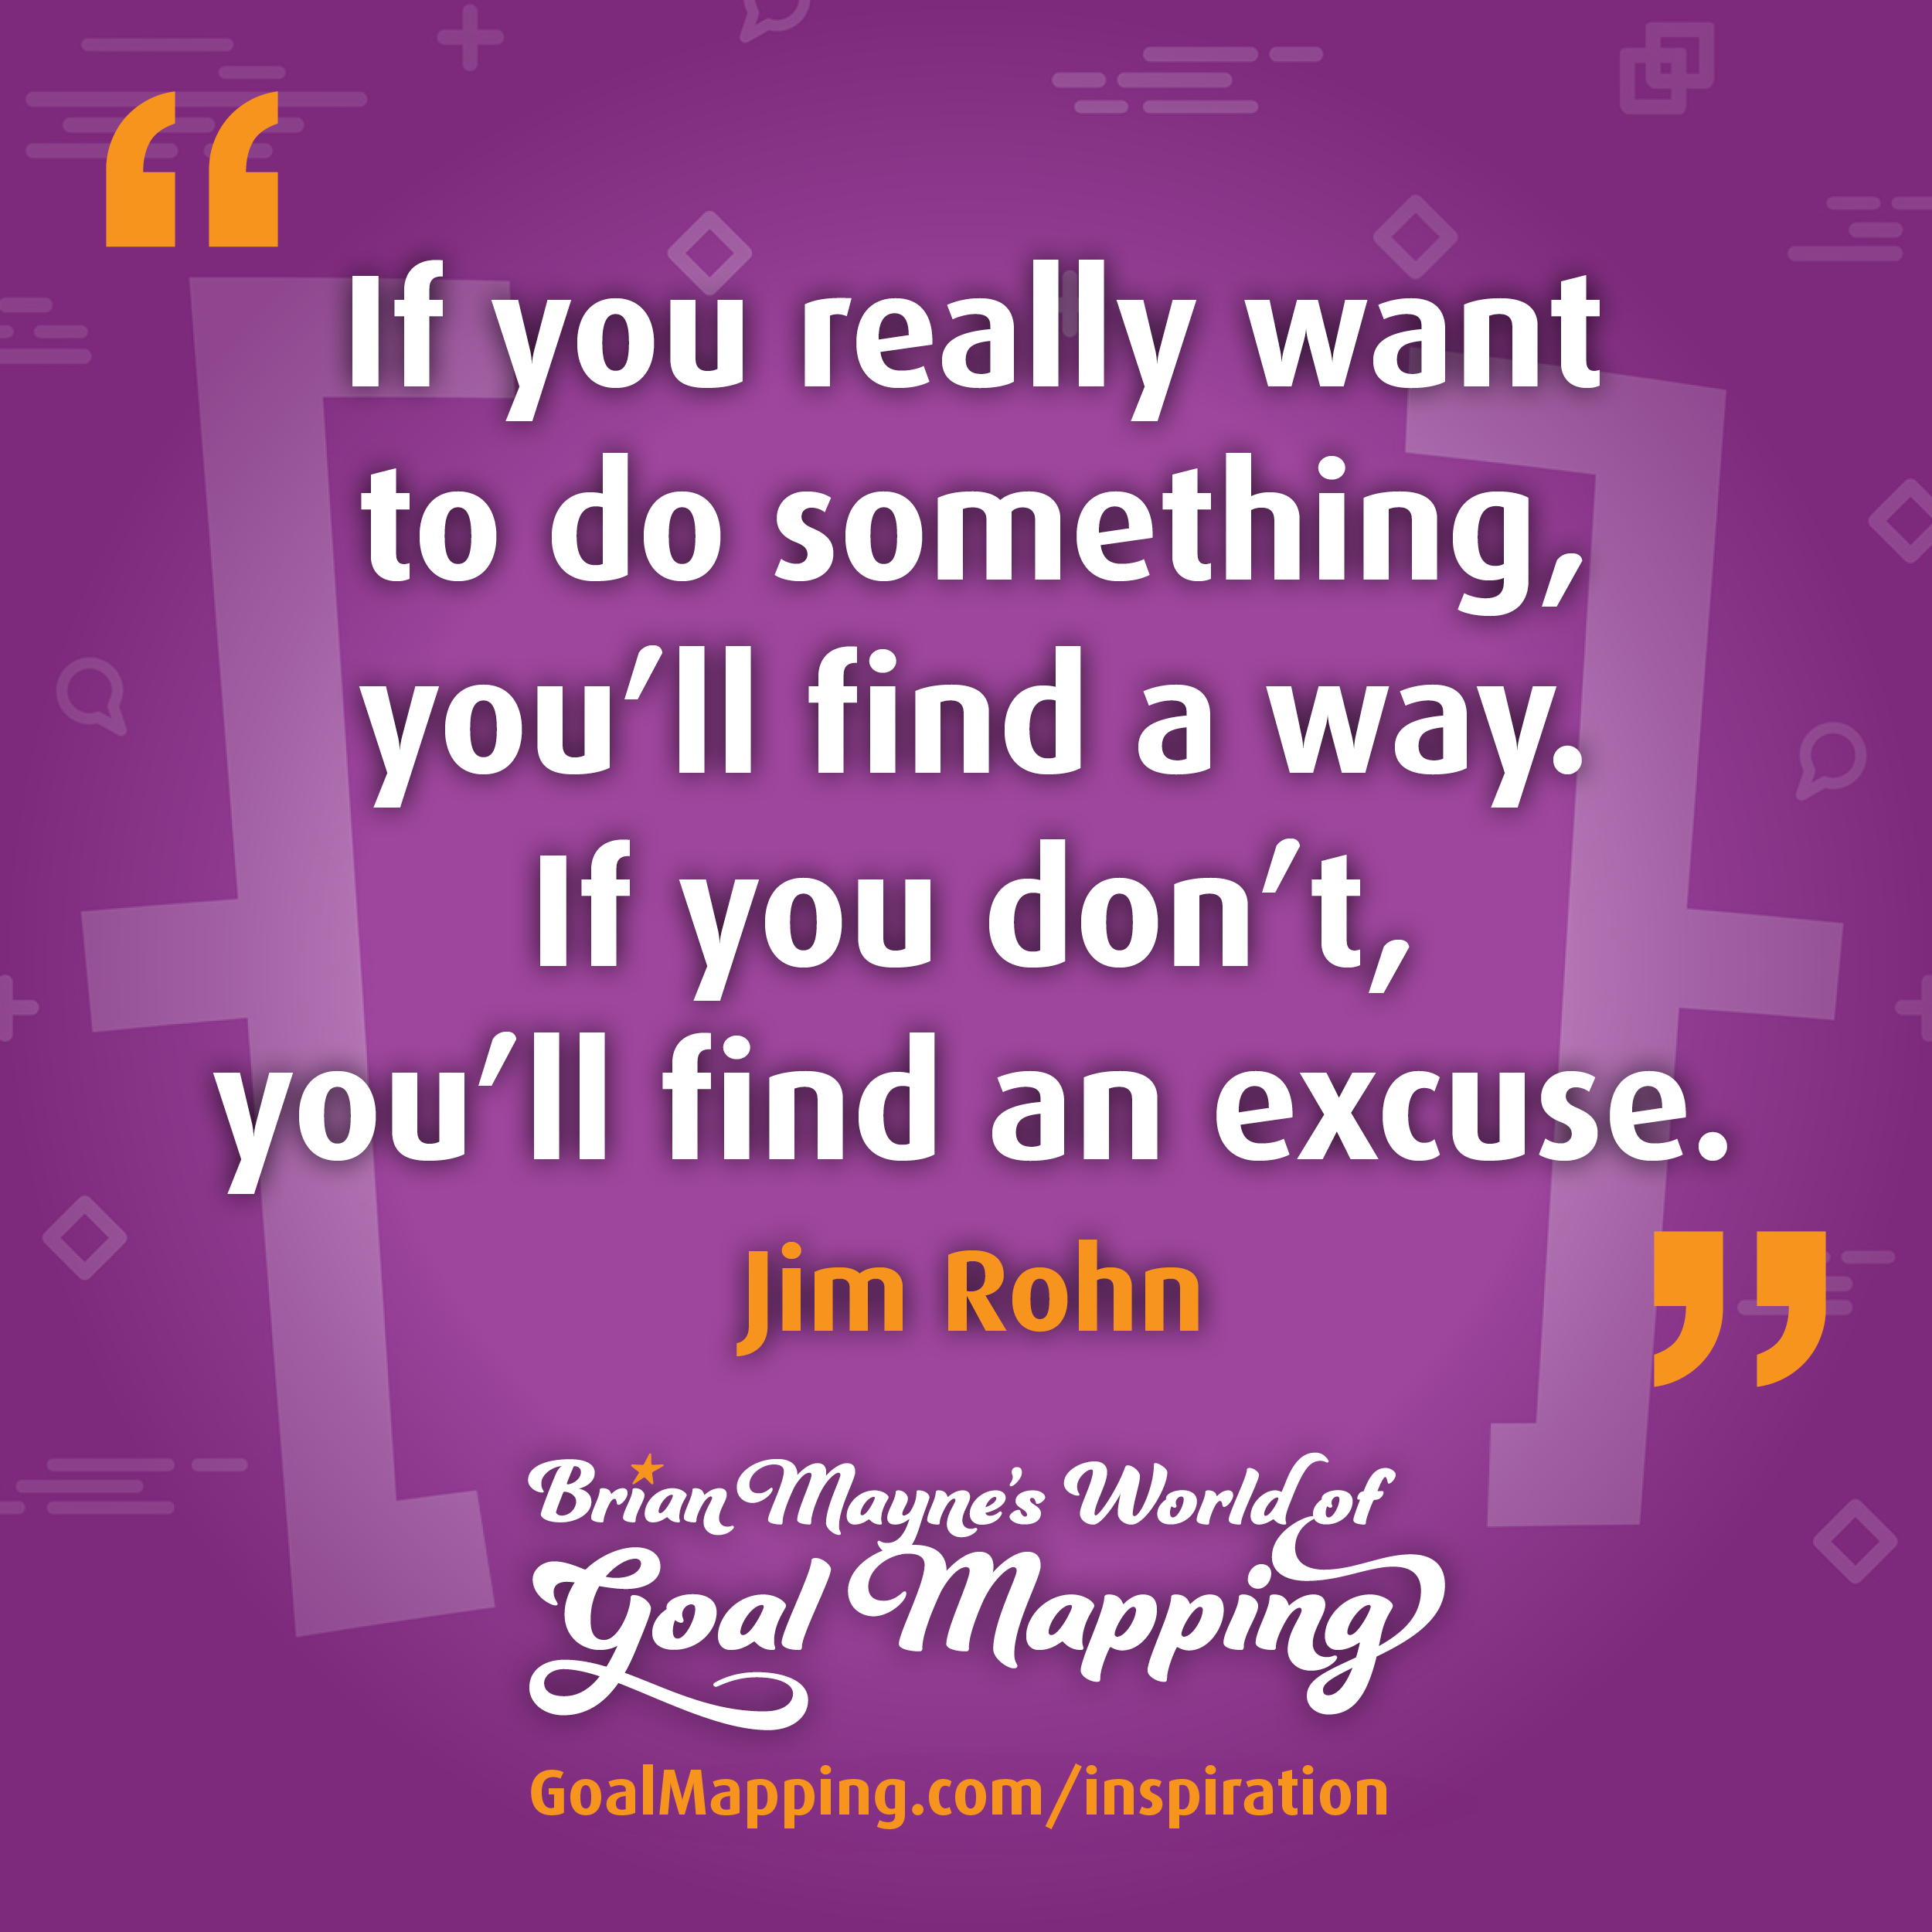 "If you really want to do something, you’ll find a way. If you don’t, you’ll find an excuse." Jim Rohn